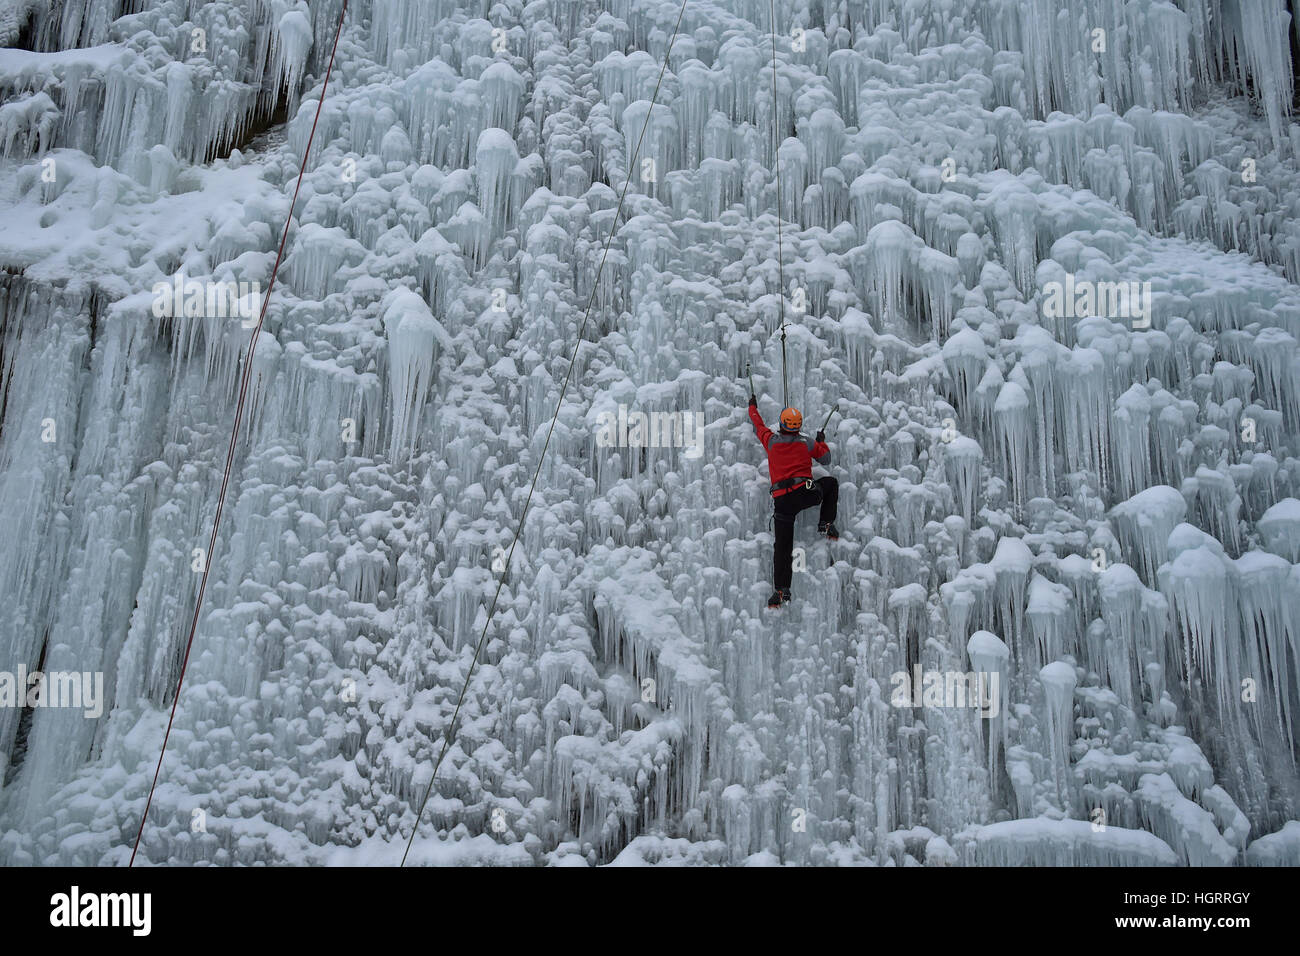 Liberec, Czech Republic. 12th Jan, 2017. A man climbs up an artificial ice wall in Liberec, Czech Republic, Thursday, January 12, 2017. Central Europe has been hit by unusually freezing weather in recent days. © Radek Petrasek/CTK Photo/Alamy Live News Stock Photo